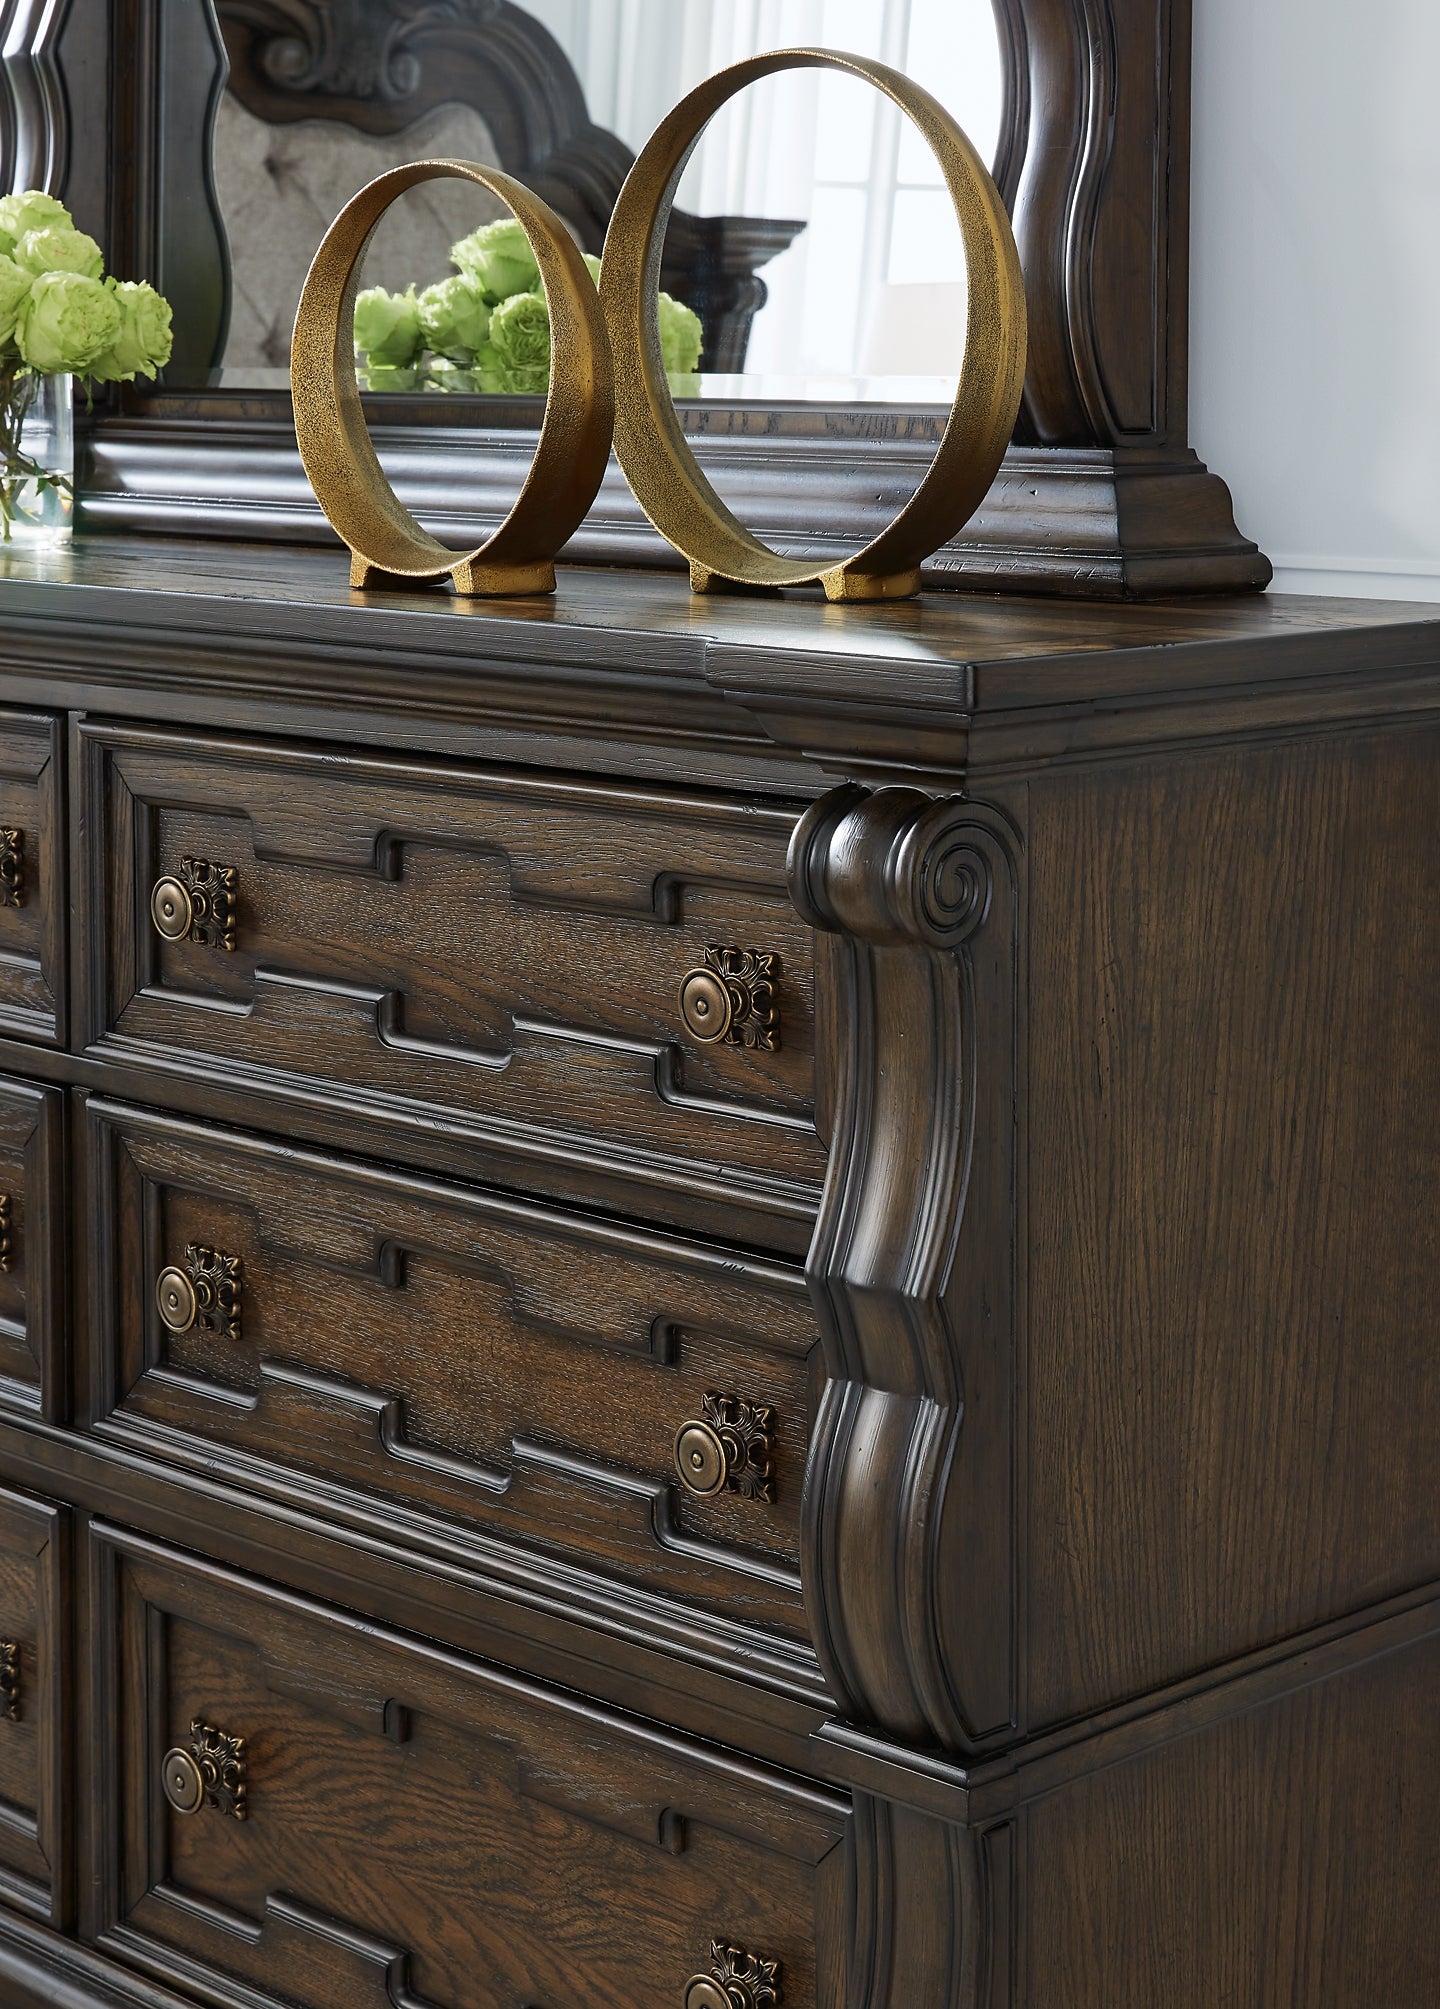 Maylee Dresser and Mirror Signature Design by Ashley®